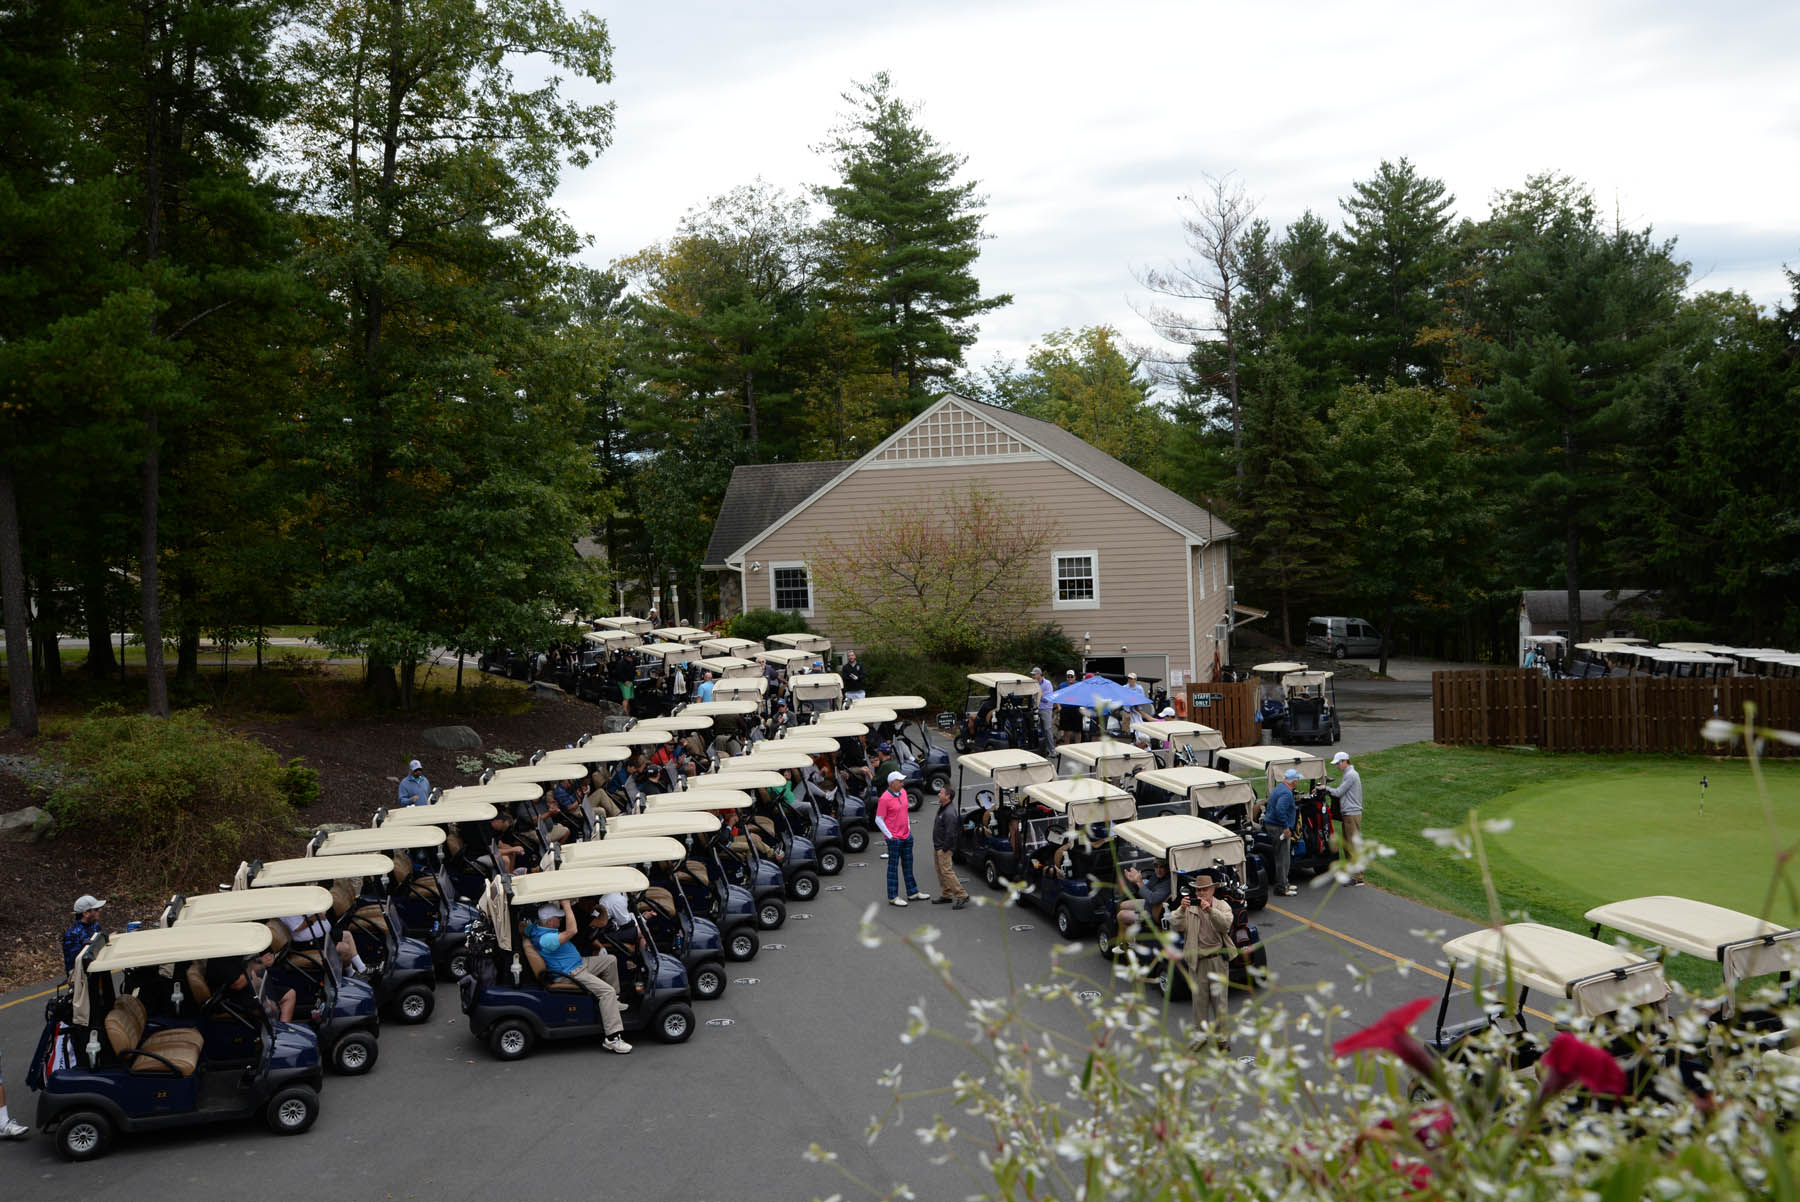 Golf carts and golf members.